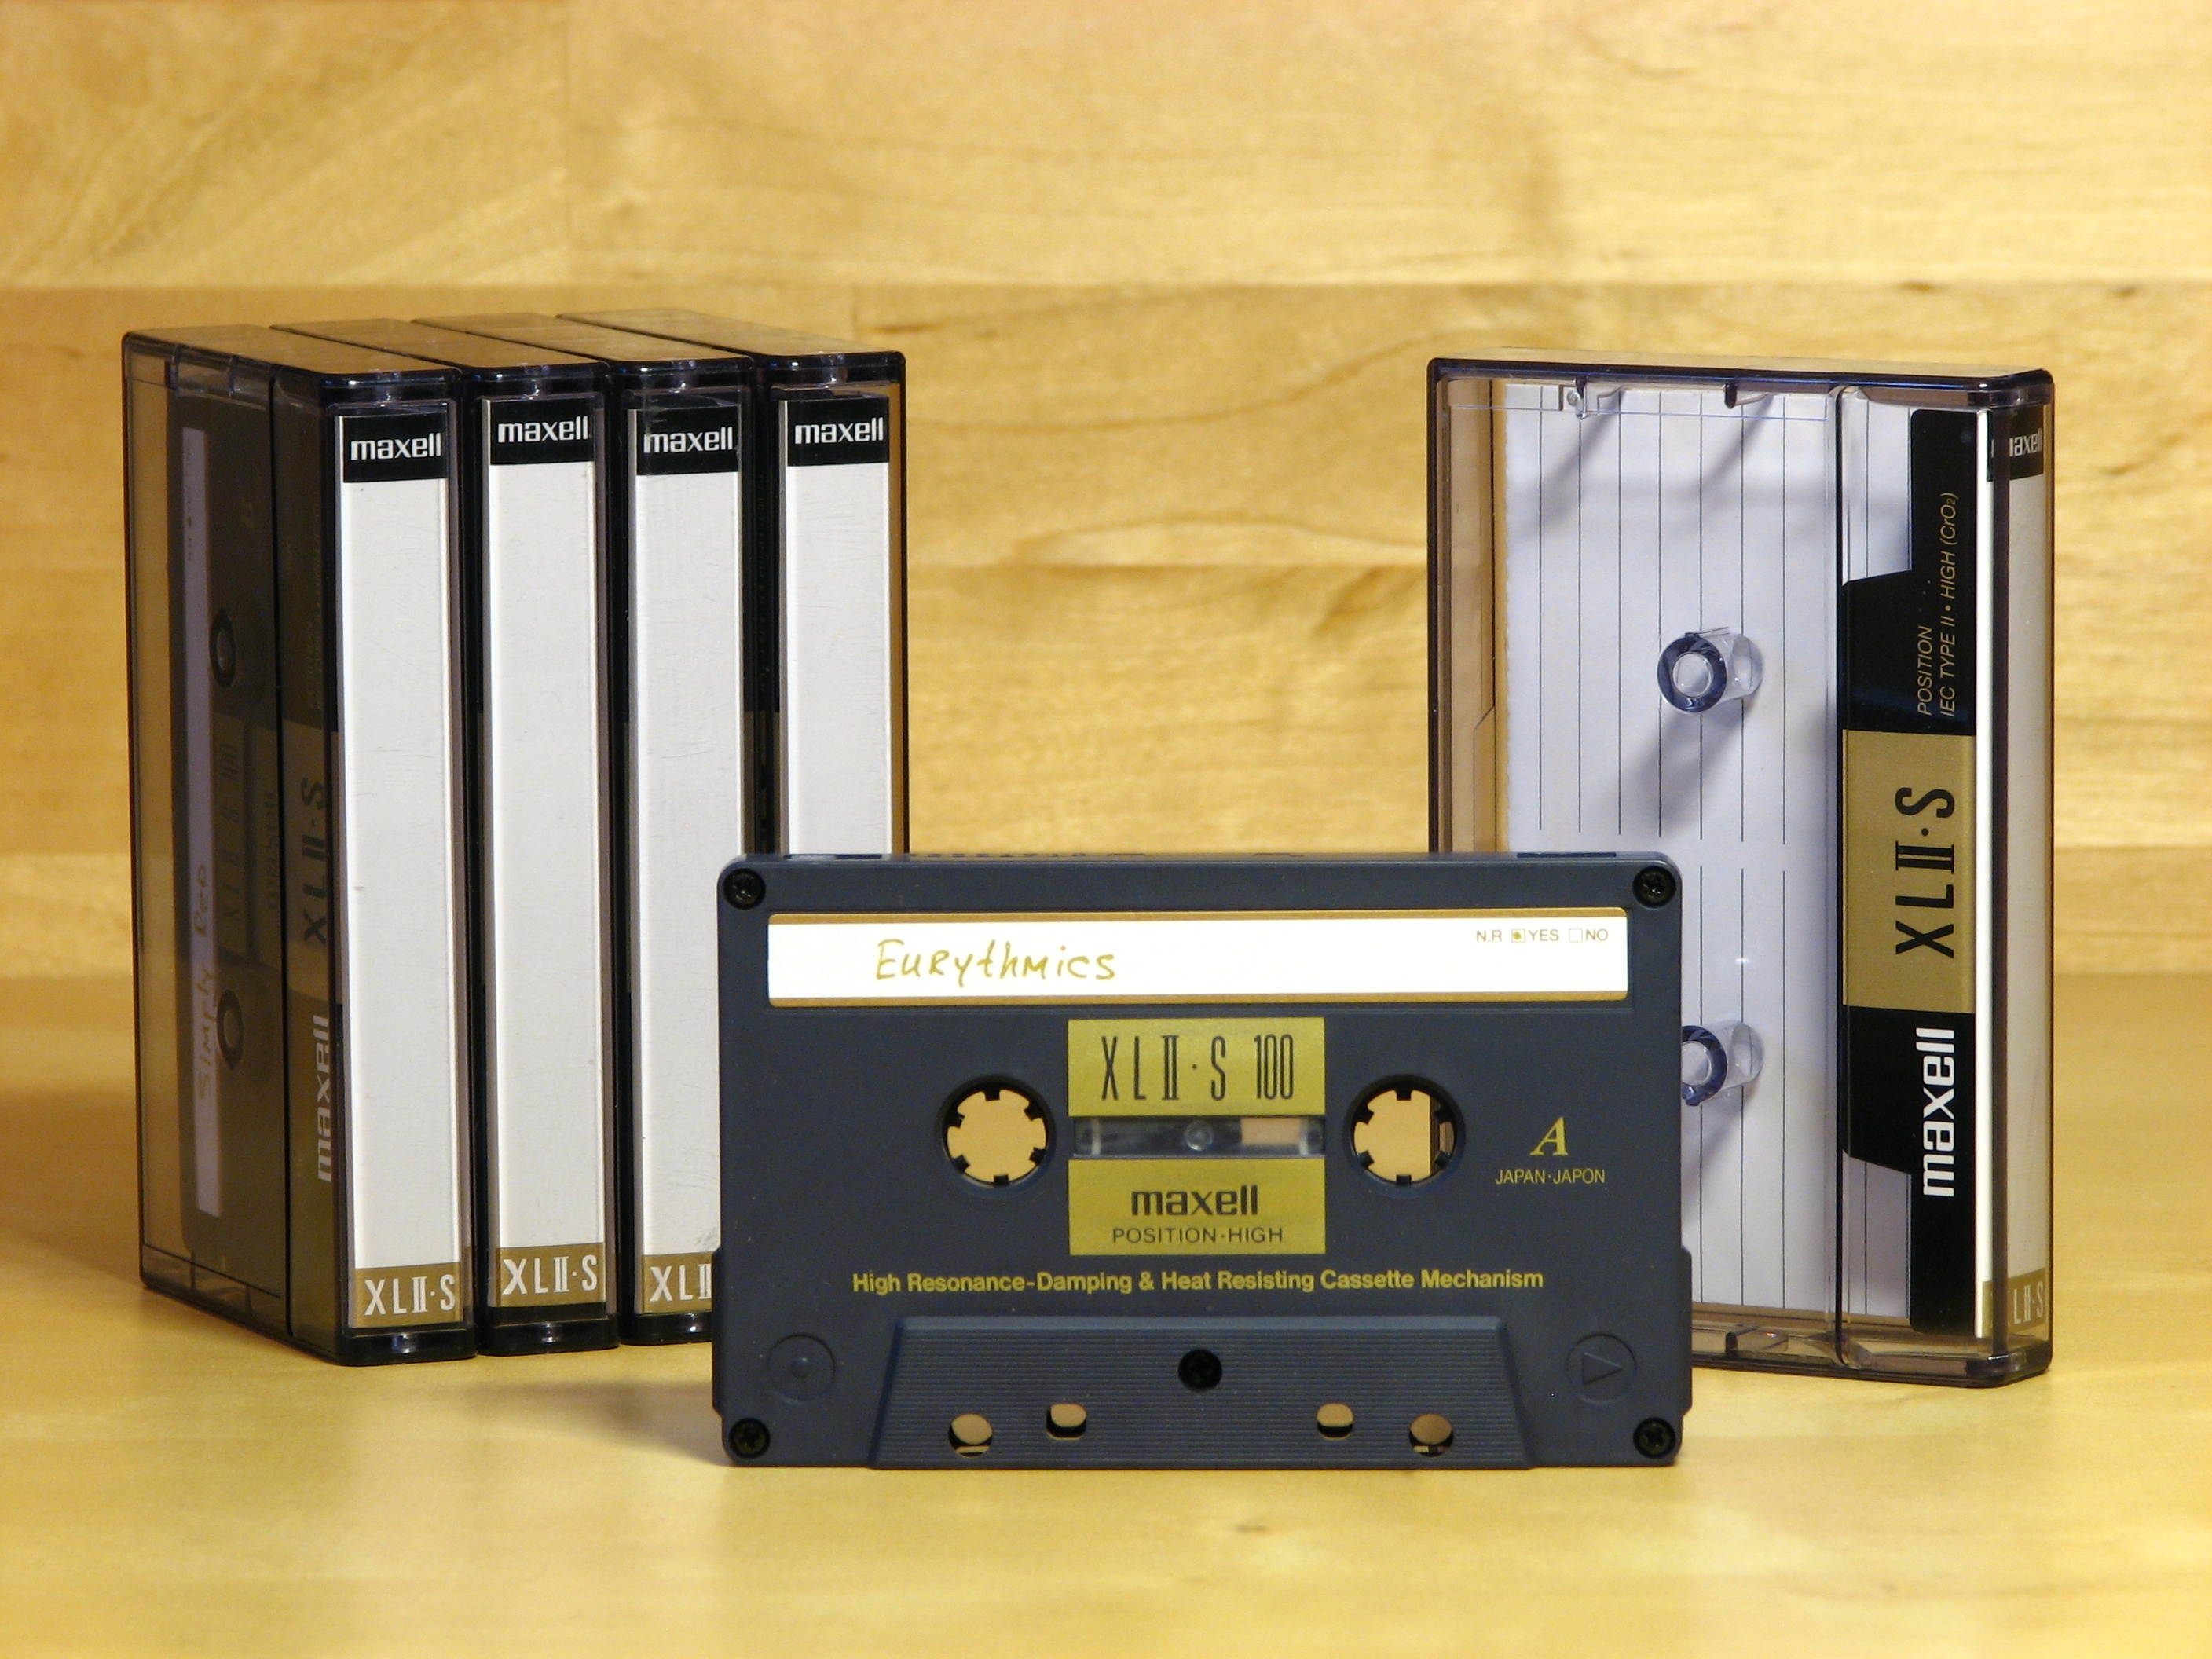 File:Compact Cassette - Maxell XL II-S 100.JPG - Wikimedia Commons